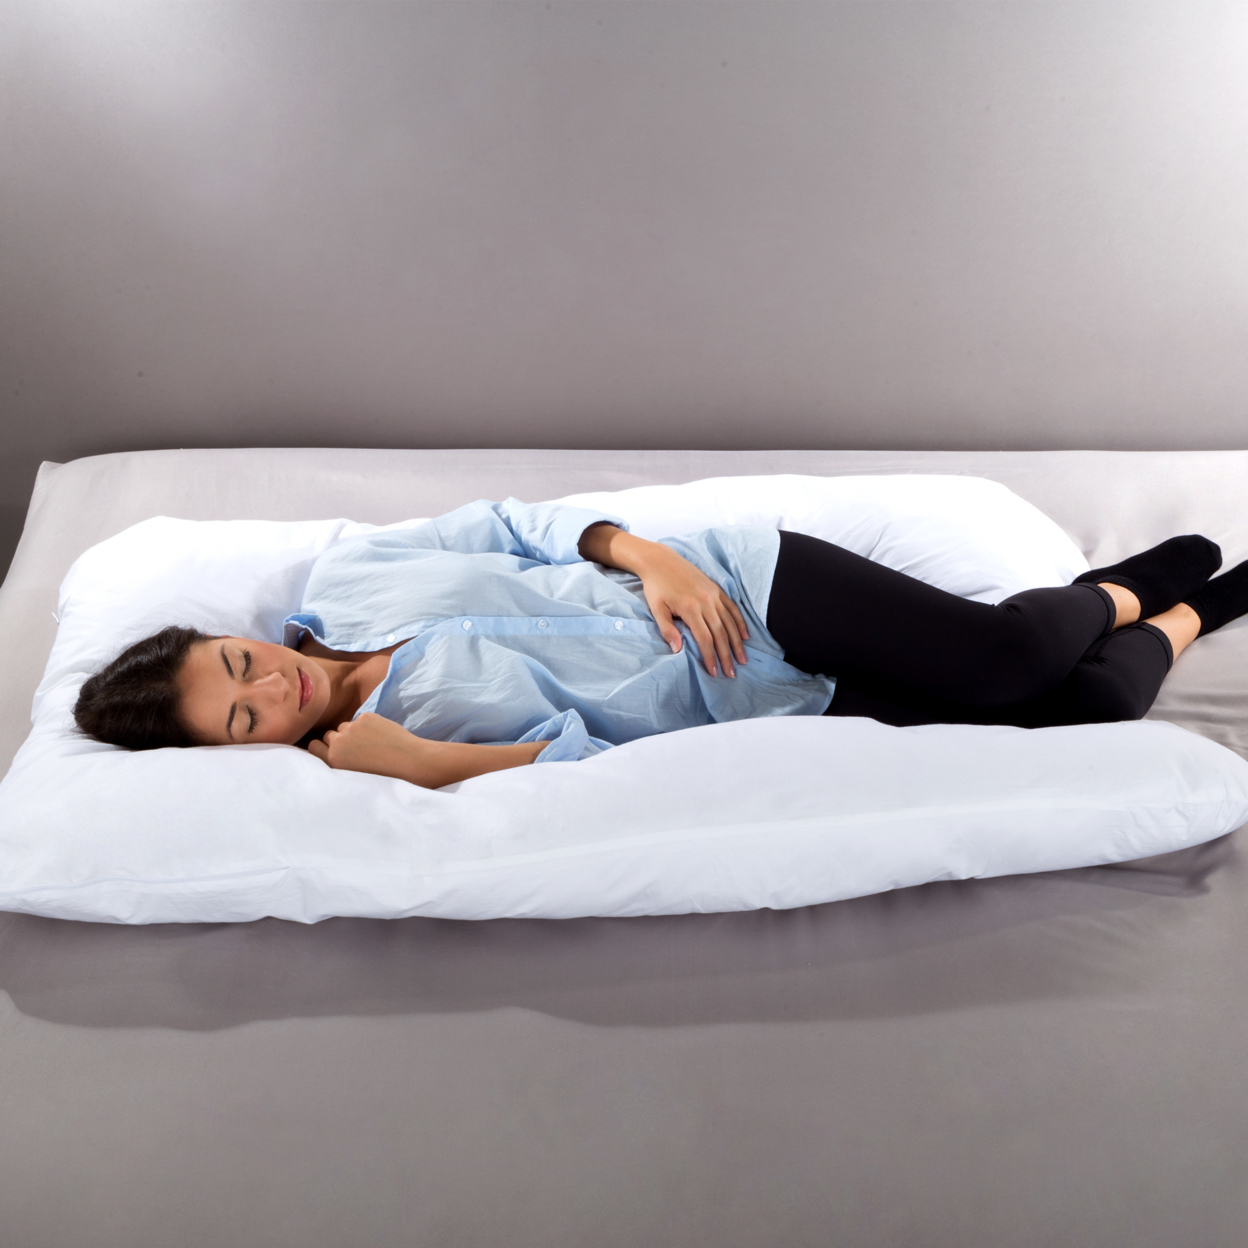 Full Body Pillow- 7 In 1 Jumbo Pillow With Removable Washable Cover, Comfortable U-Shape Pregnancy Pillow